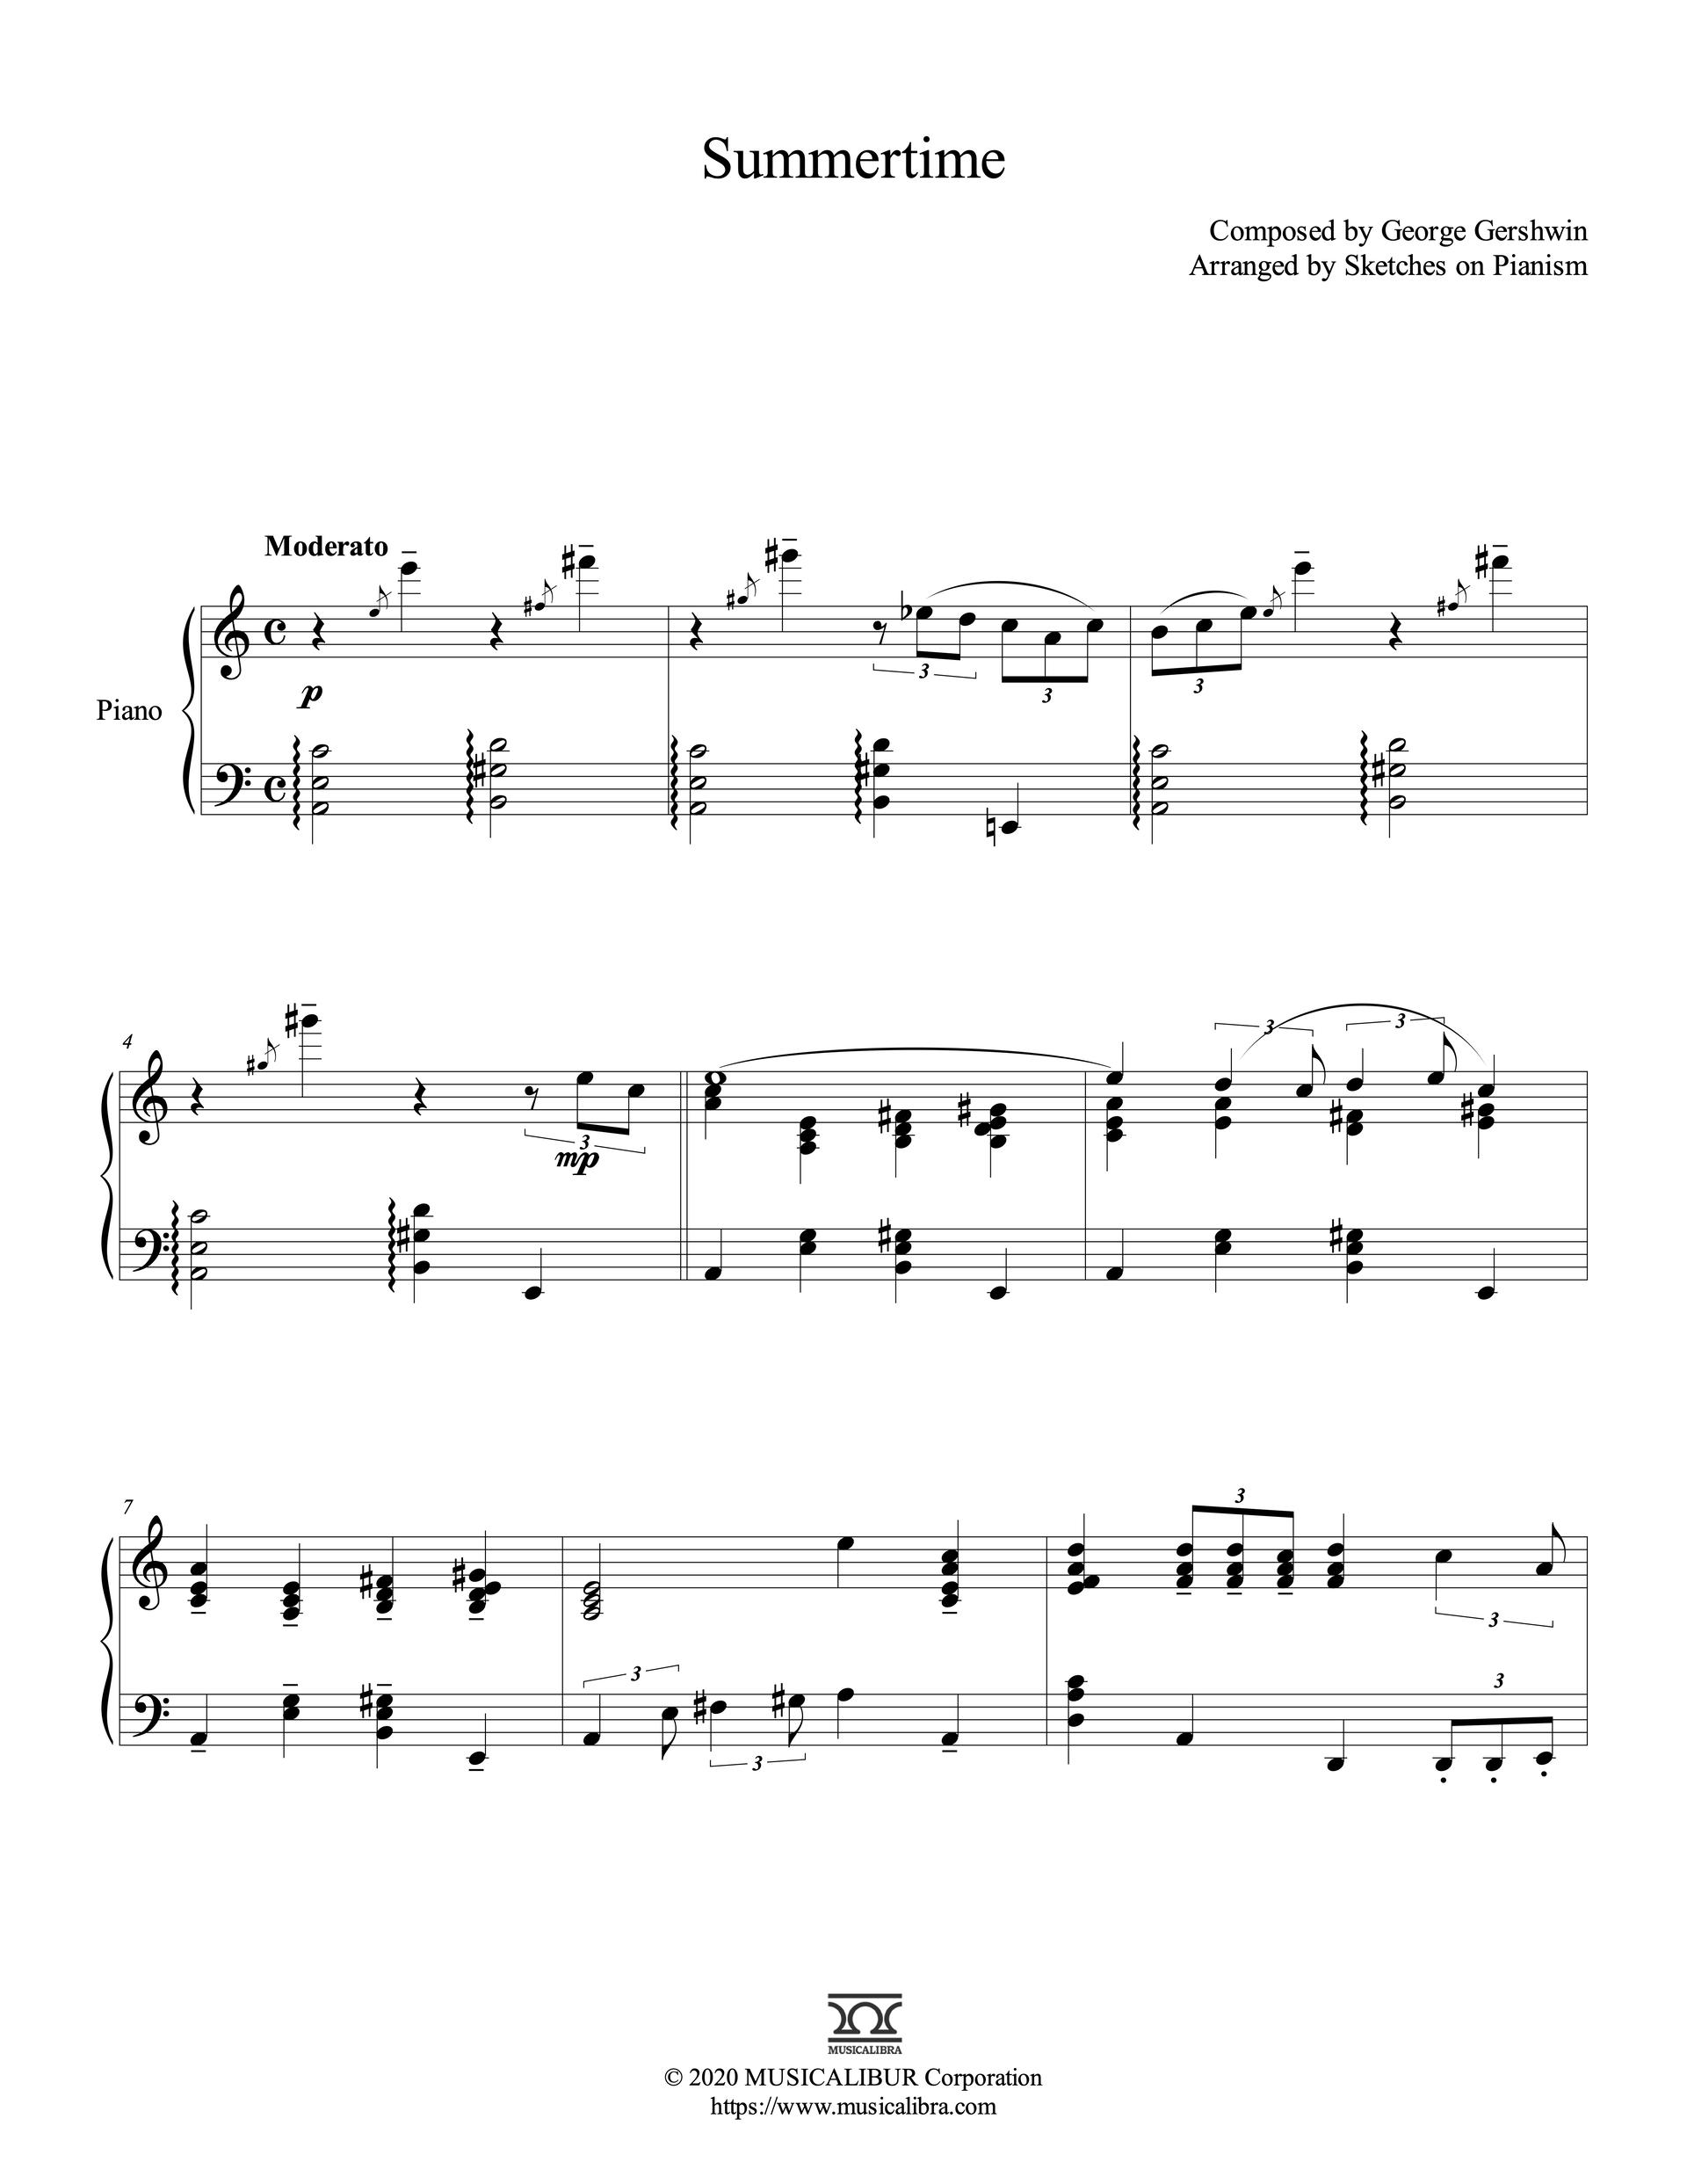 Sheet music of George Gershwin's Summertime arranged for piano solo preview page 1